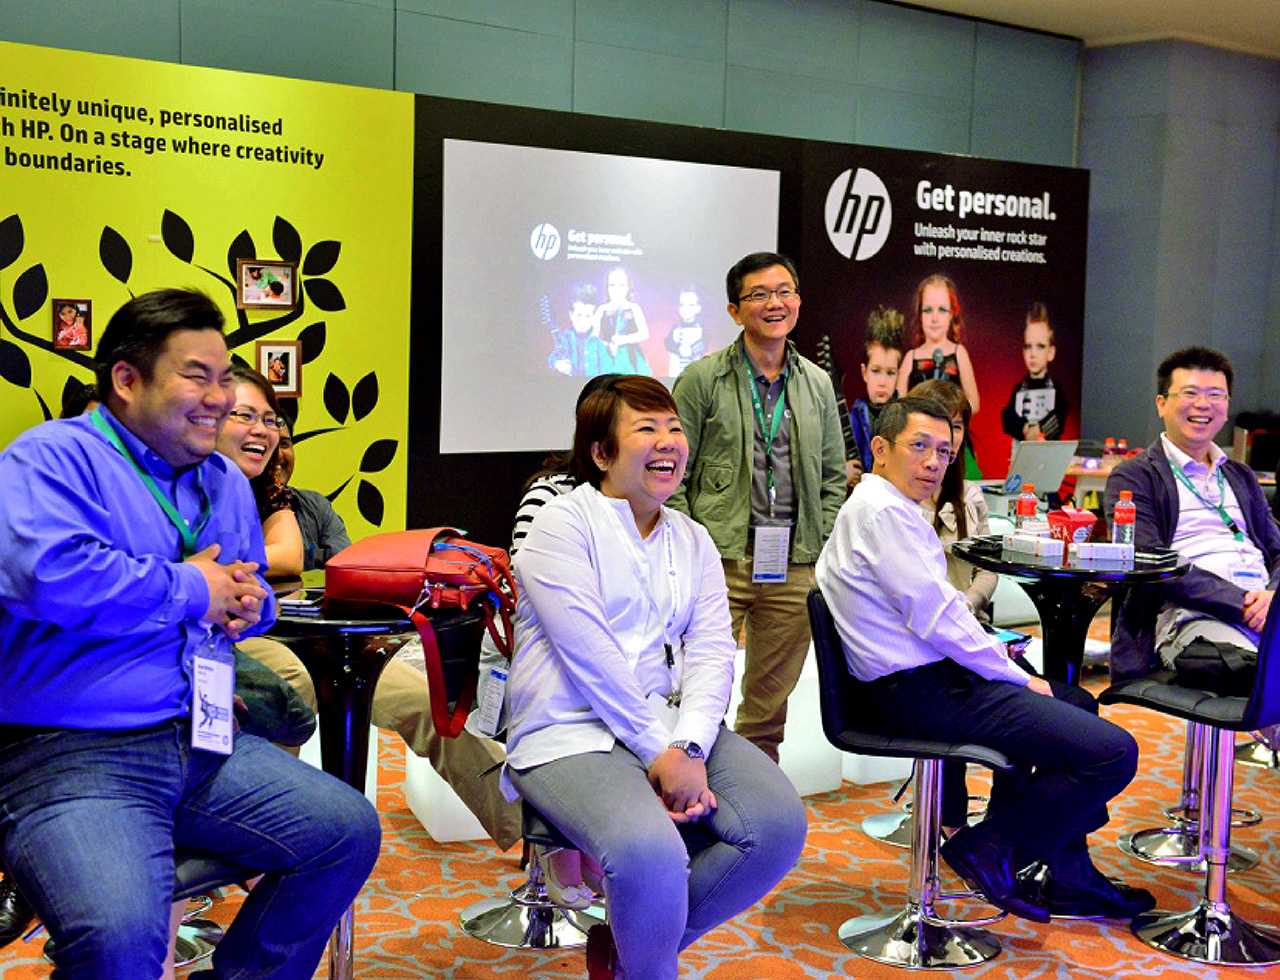 A group of highly engaged attendees at a conference booth